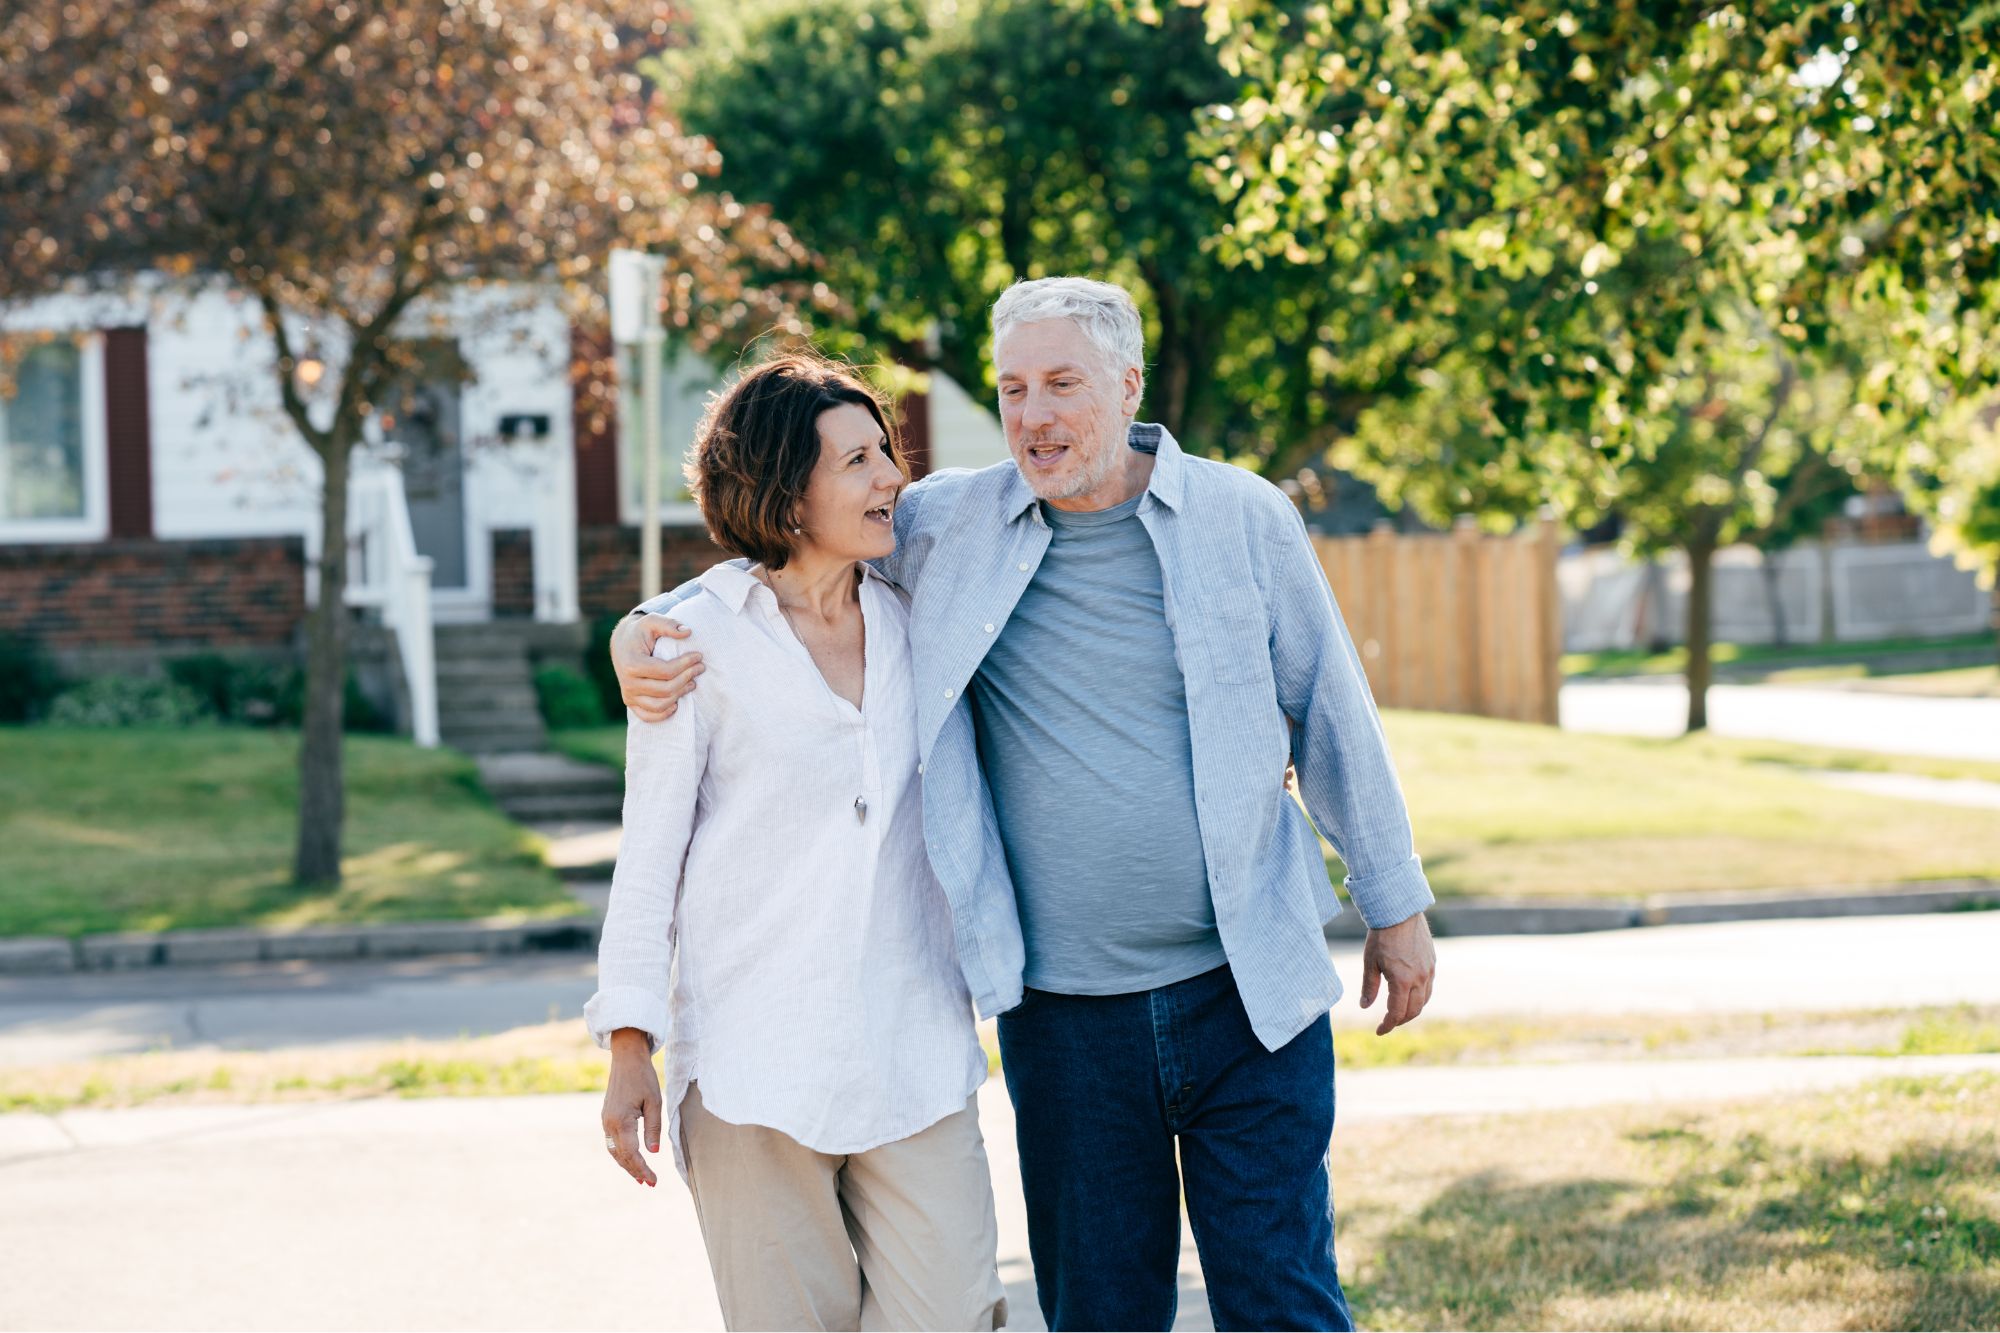 Retiring Soon? Why Moving Might Be the Perfect Next Step